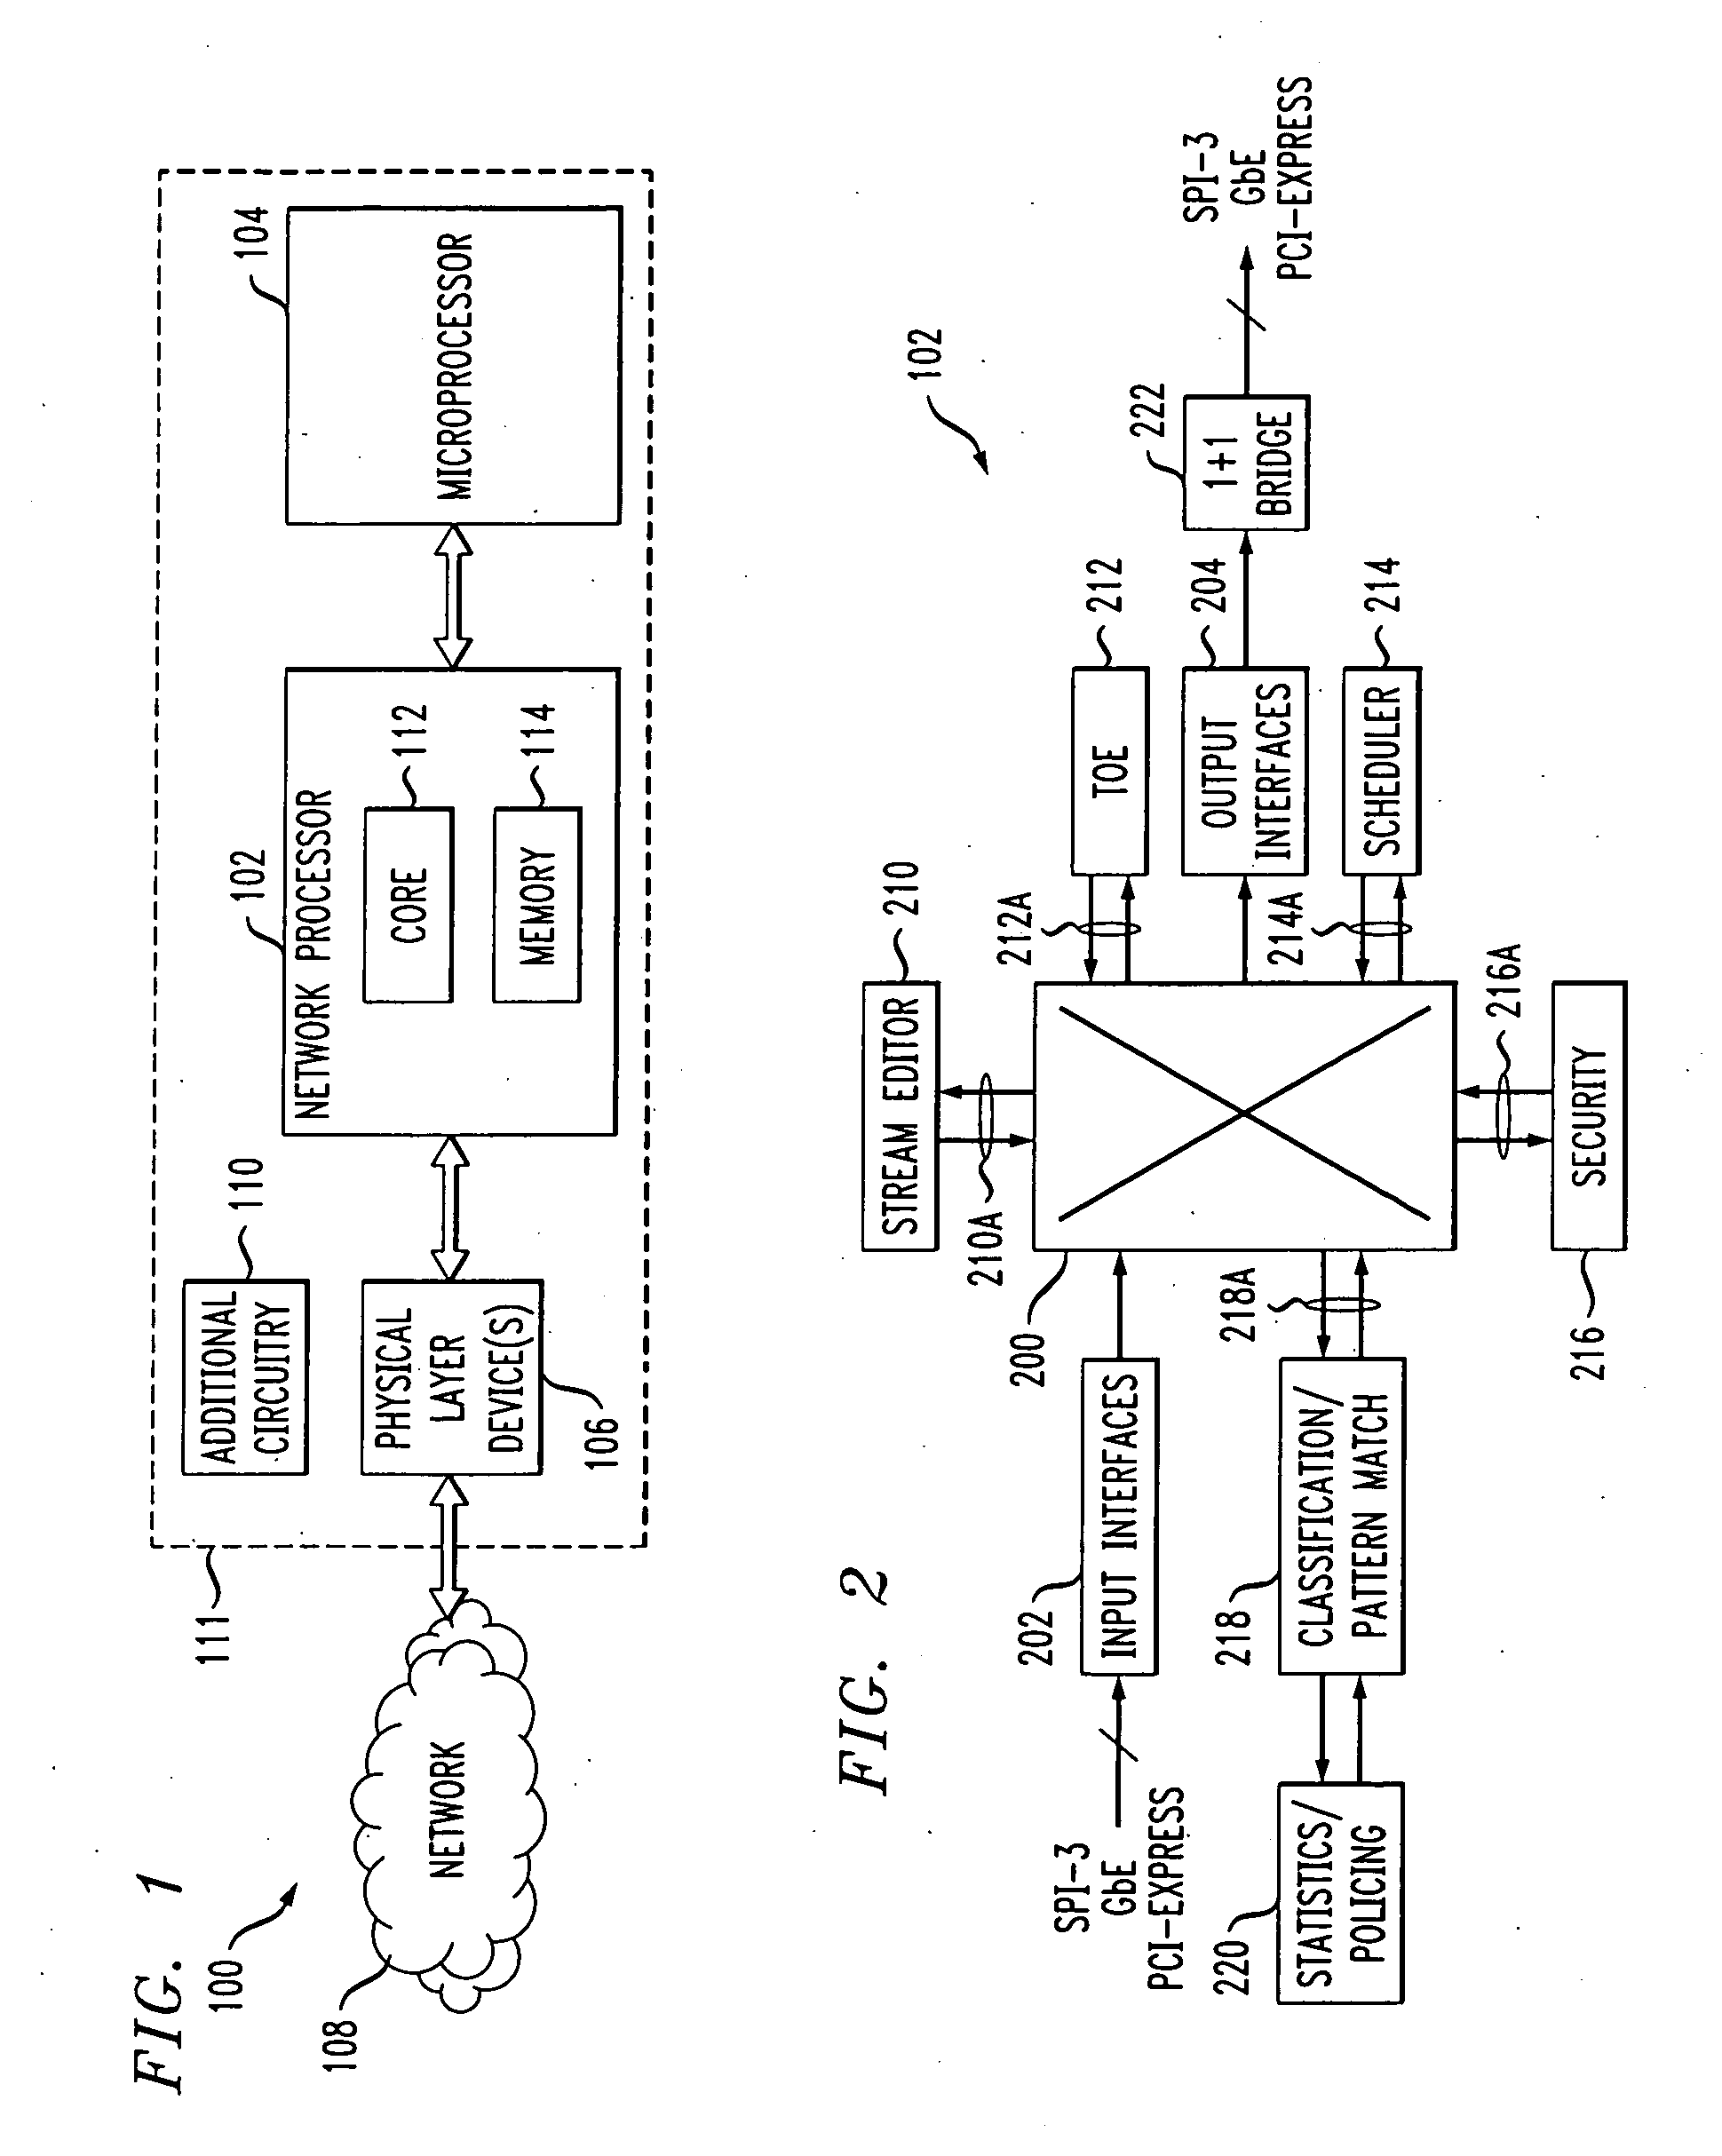 Switch-based network processor